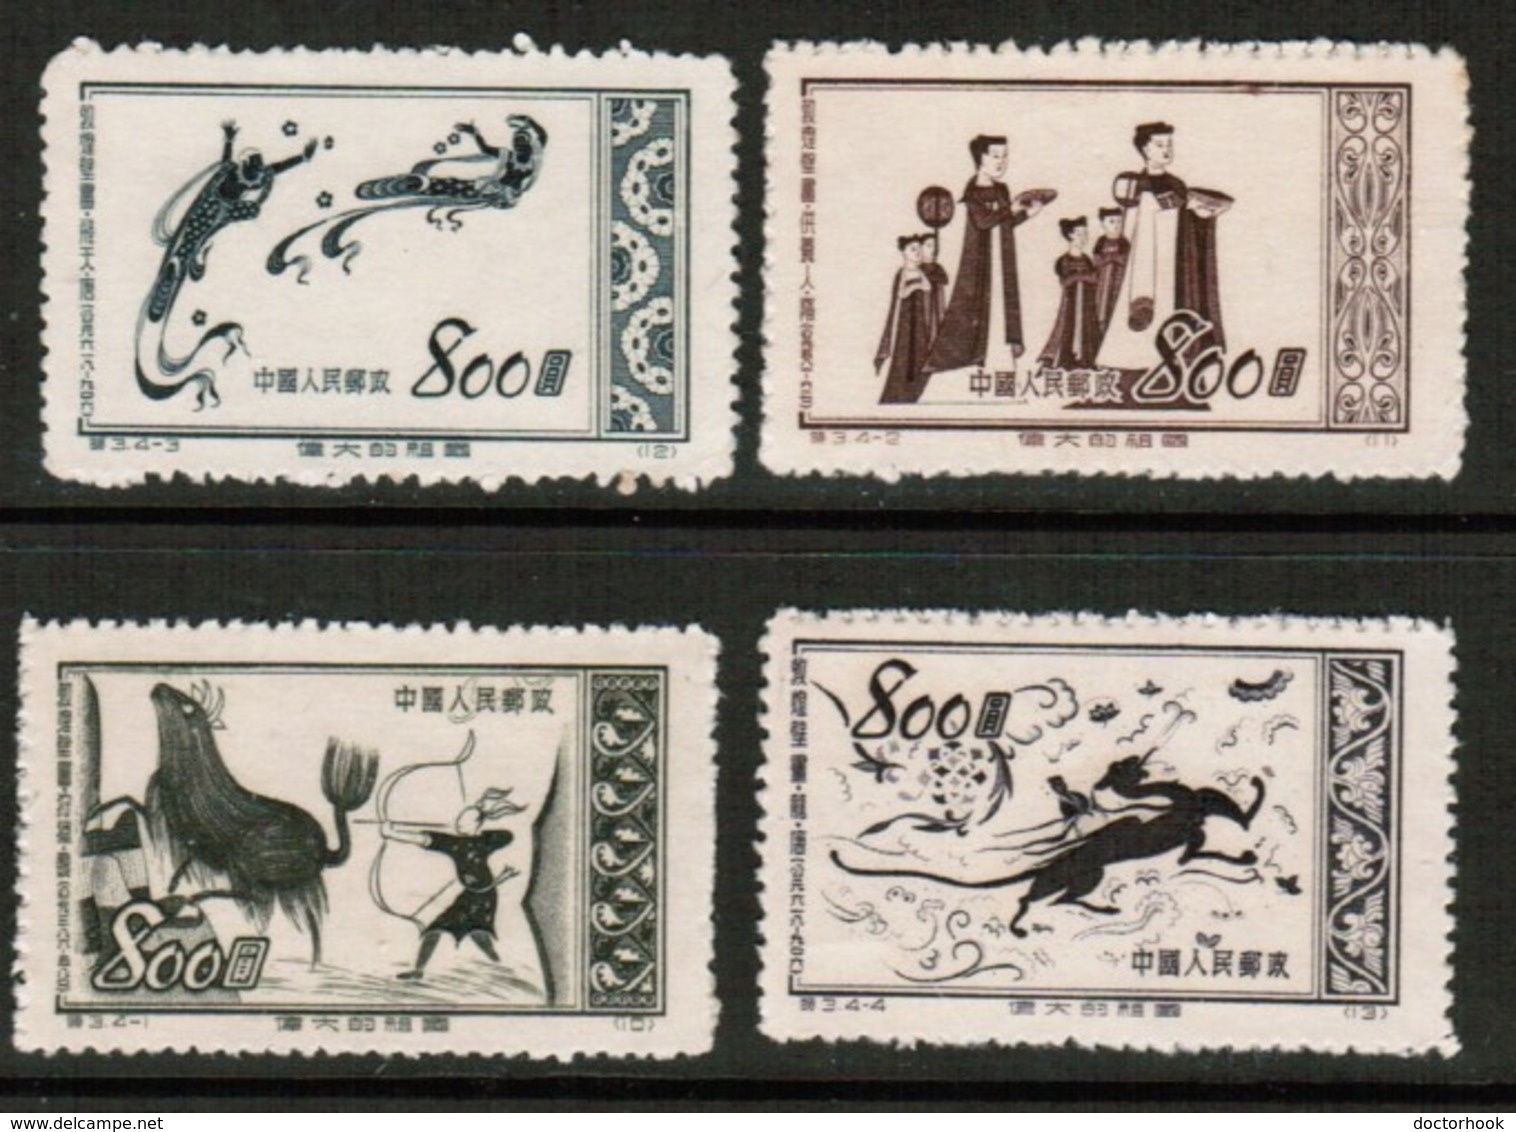 PEOPLES REPUBLIC Of CHINA  Scott # 151-4* VF UNUSED NO GUM AS ISSUED (Stamp Scan # 508) - Unused Stamps